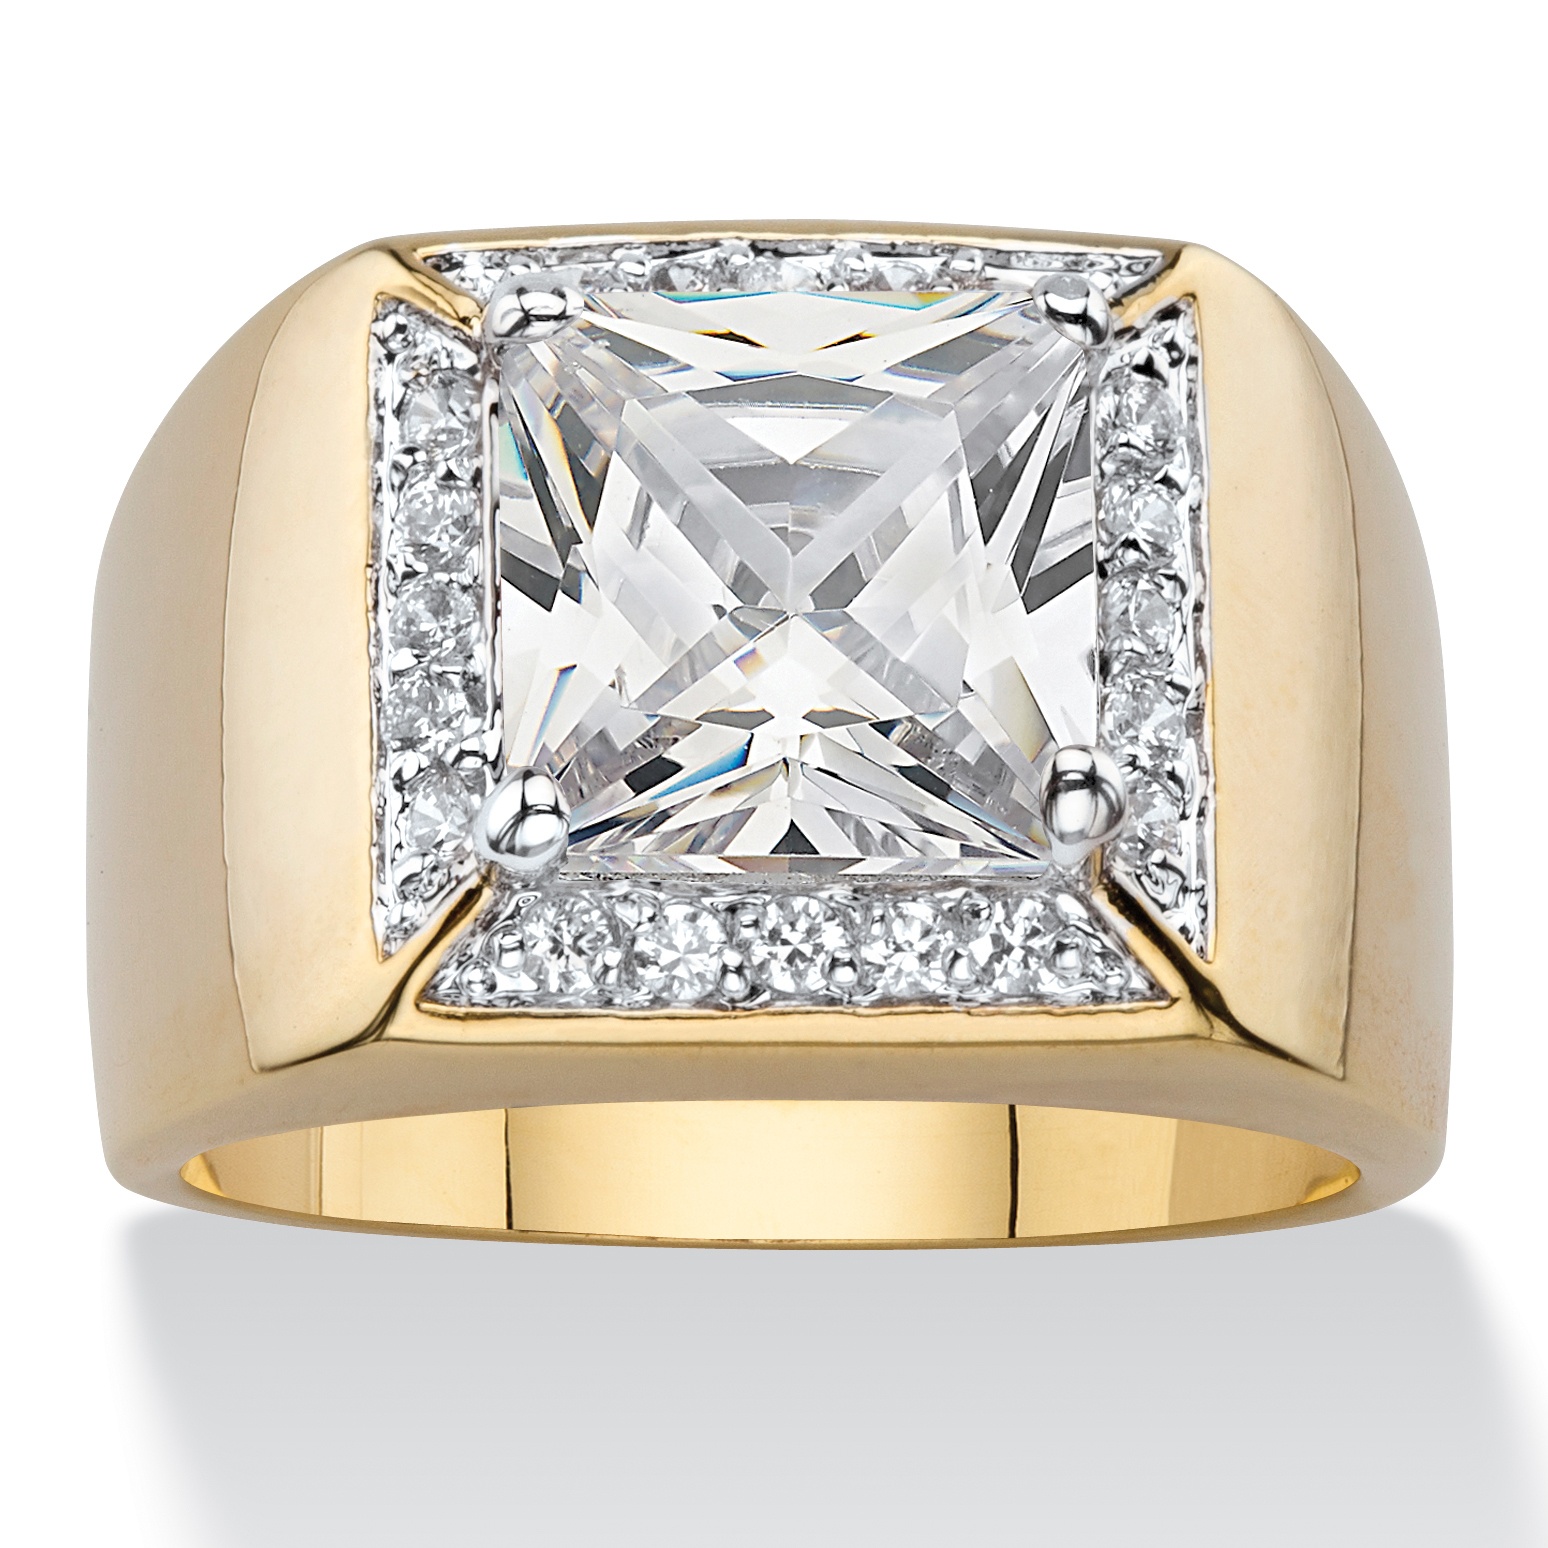 Men's 2.44 TCW SquareCut Cubic Zirconia Halo Ring 14k GoldPlated at